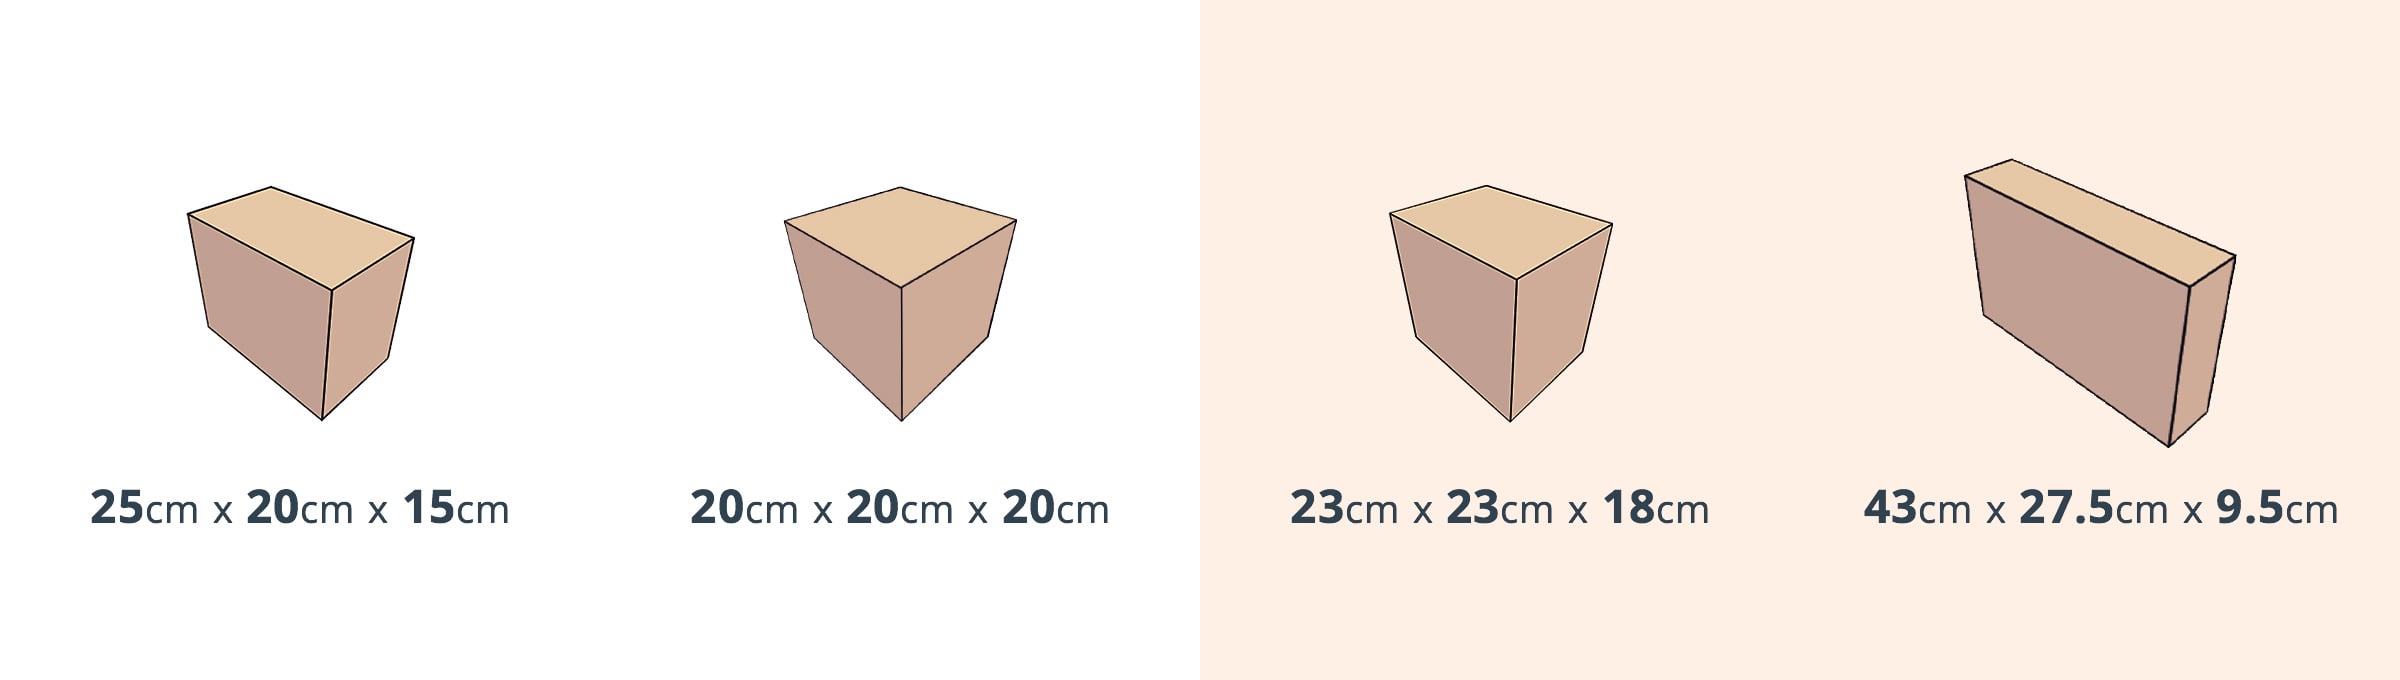 Shoebox size packaging dimensions